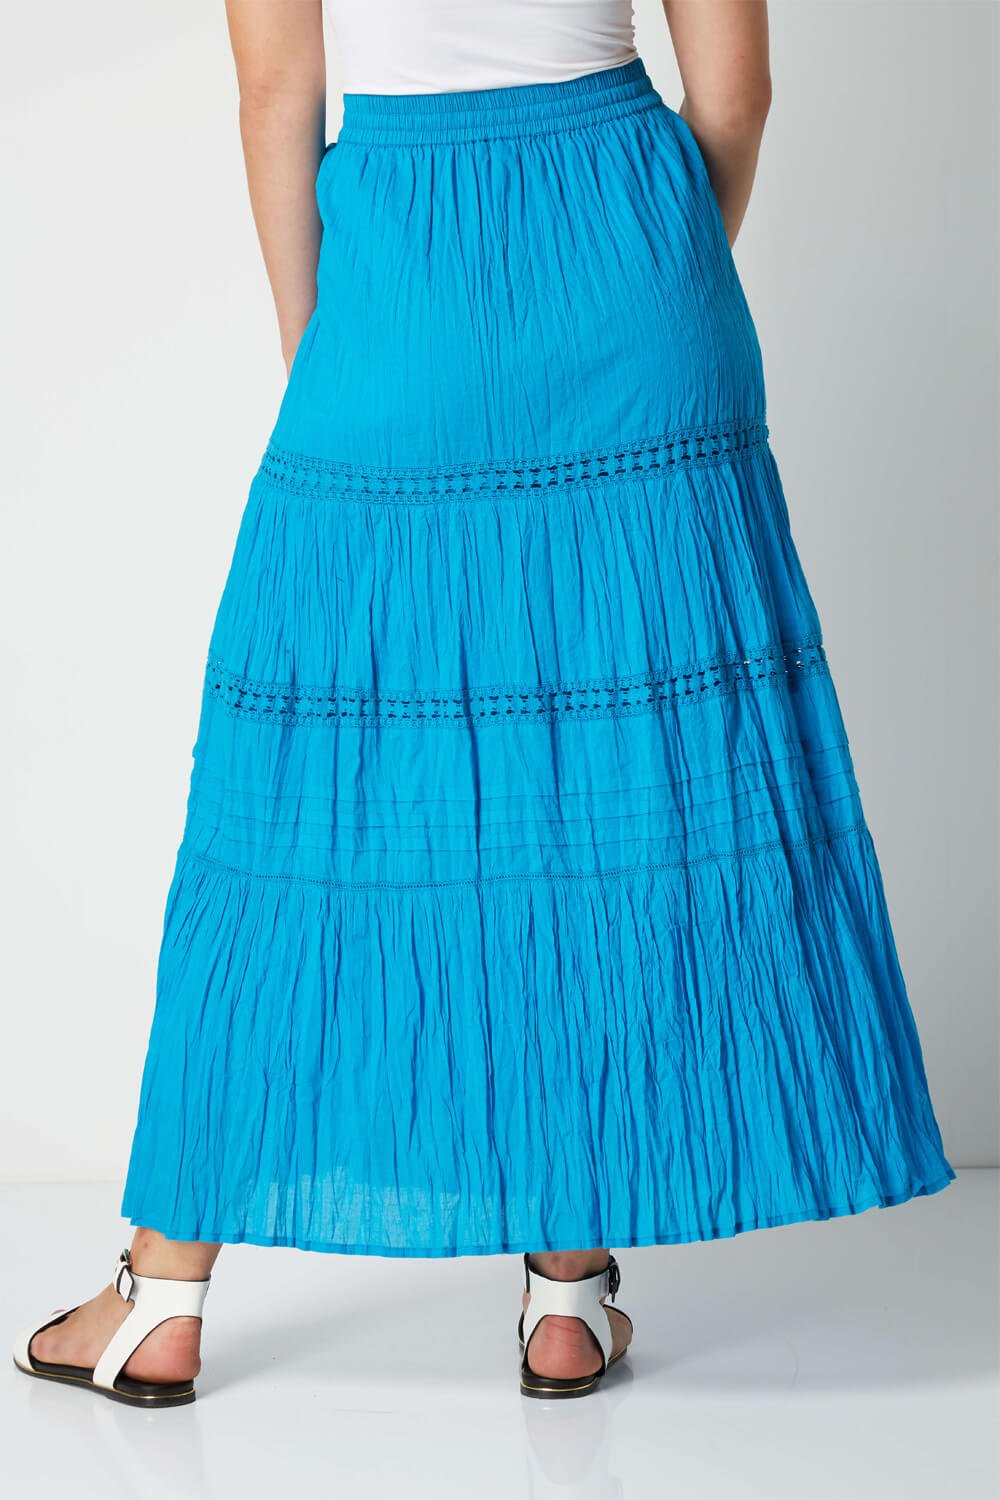 Tiered Gypsy Maxi Skirt in Turquoise - Roman Originals UK